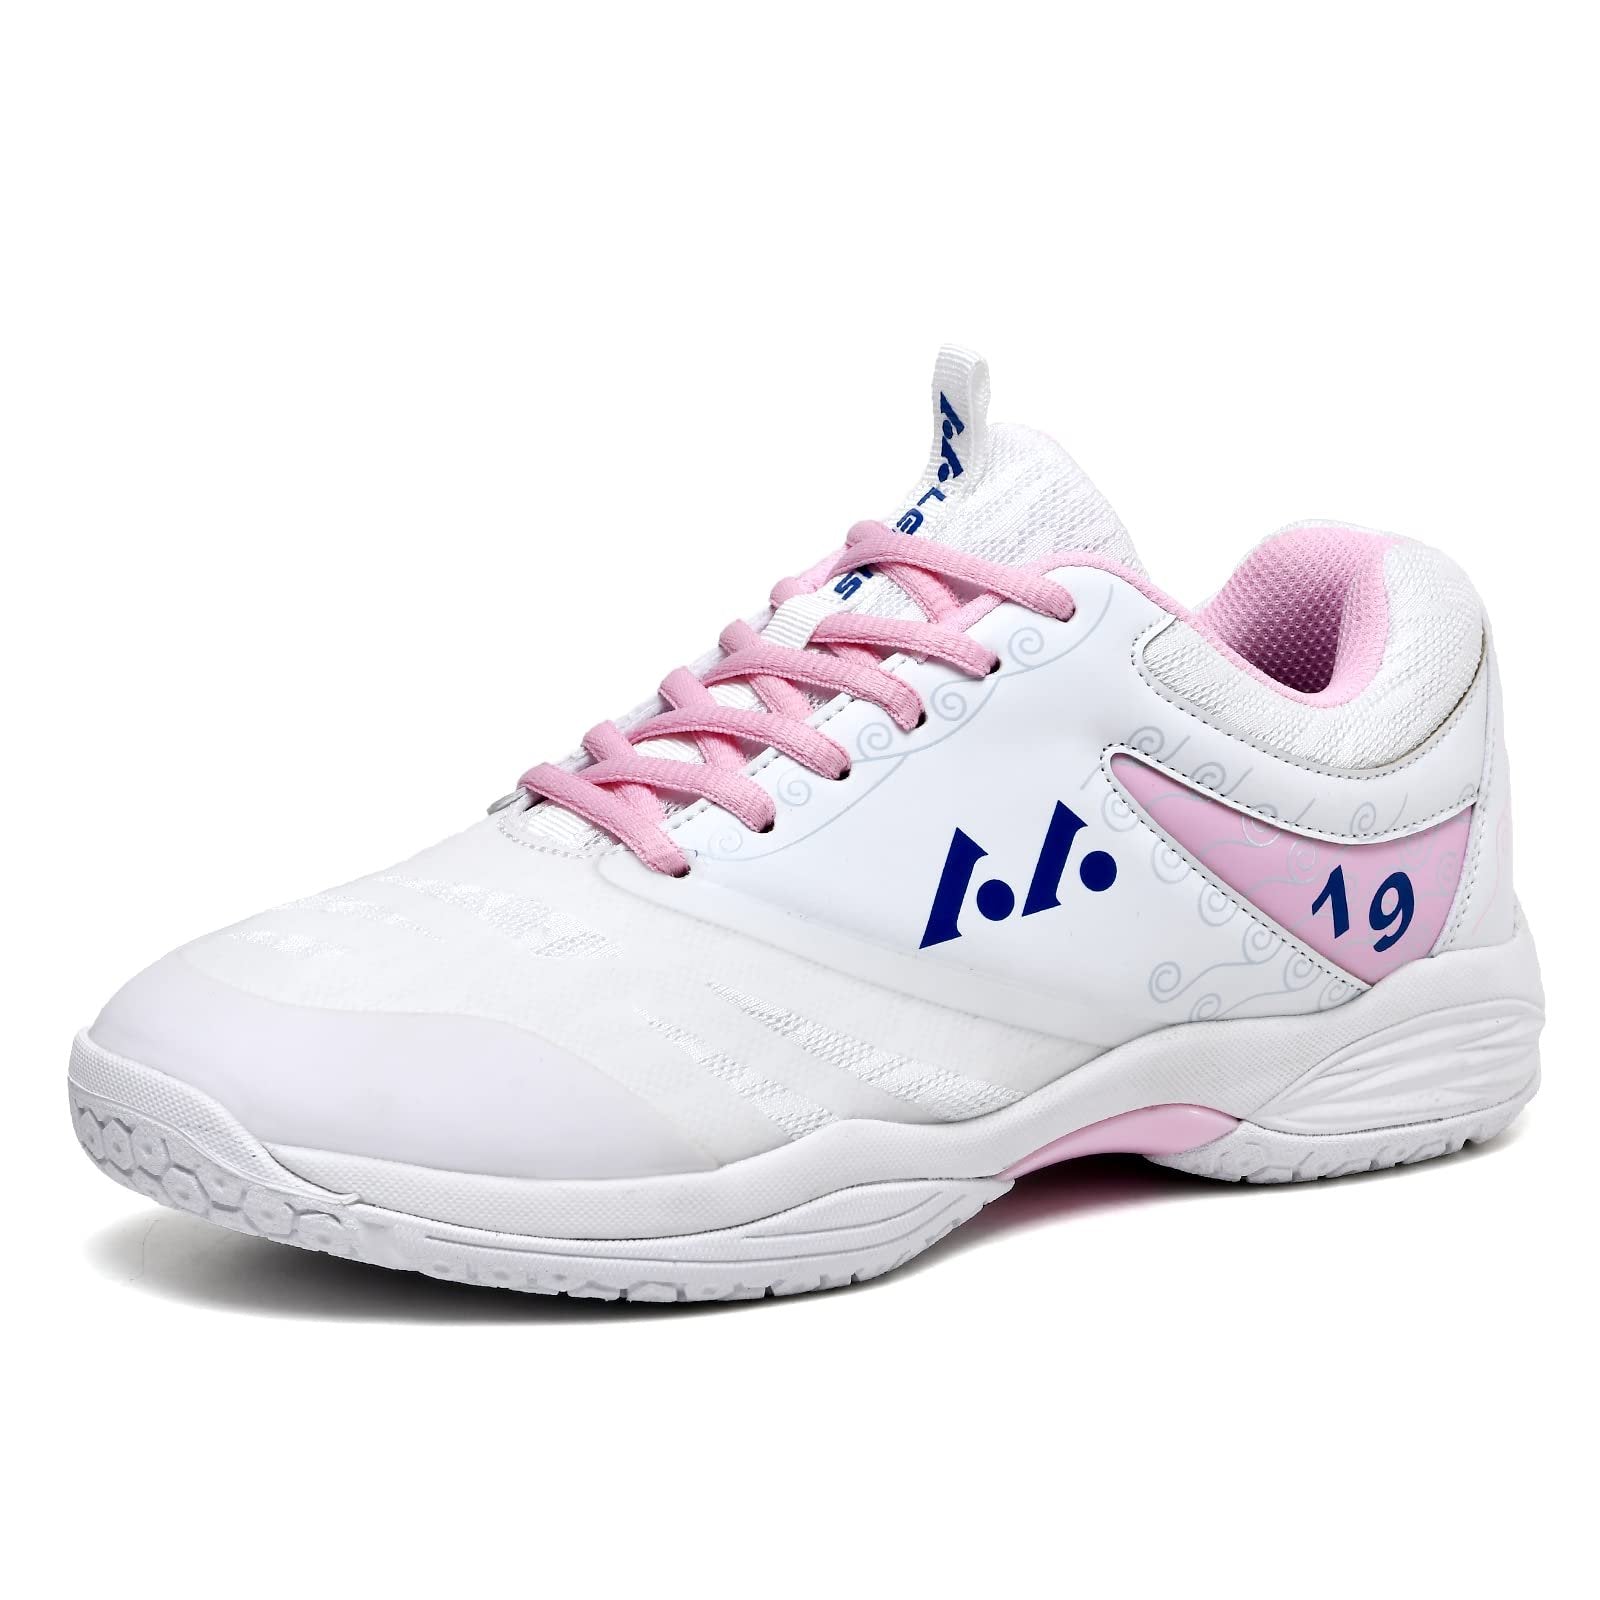 Womens Mens Lightweight Indoor Court Shoes Badminton Shoes for Pickleball, Tennis, Table Tennis, Volleyball (019 Pink, 37)